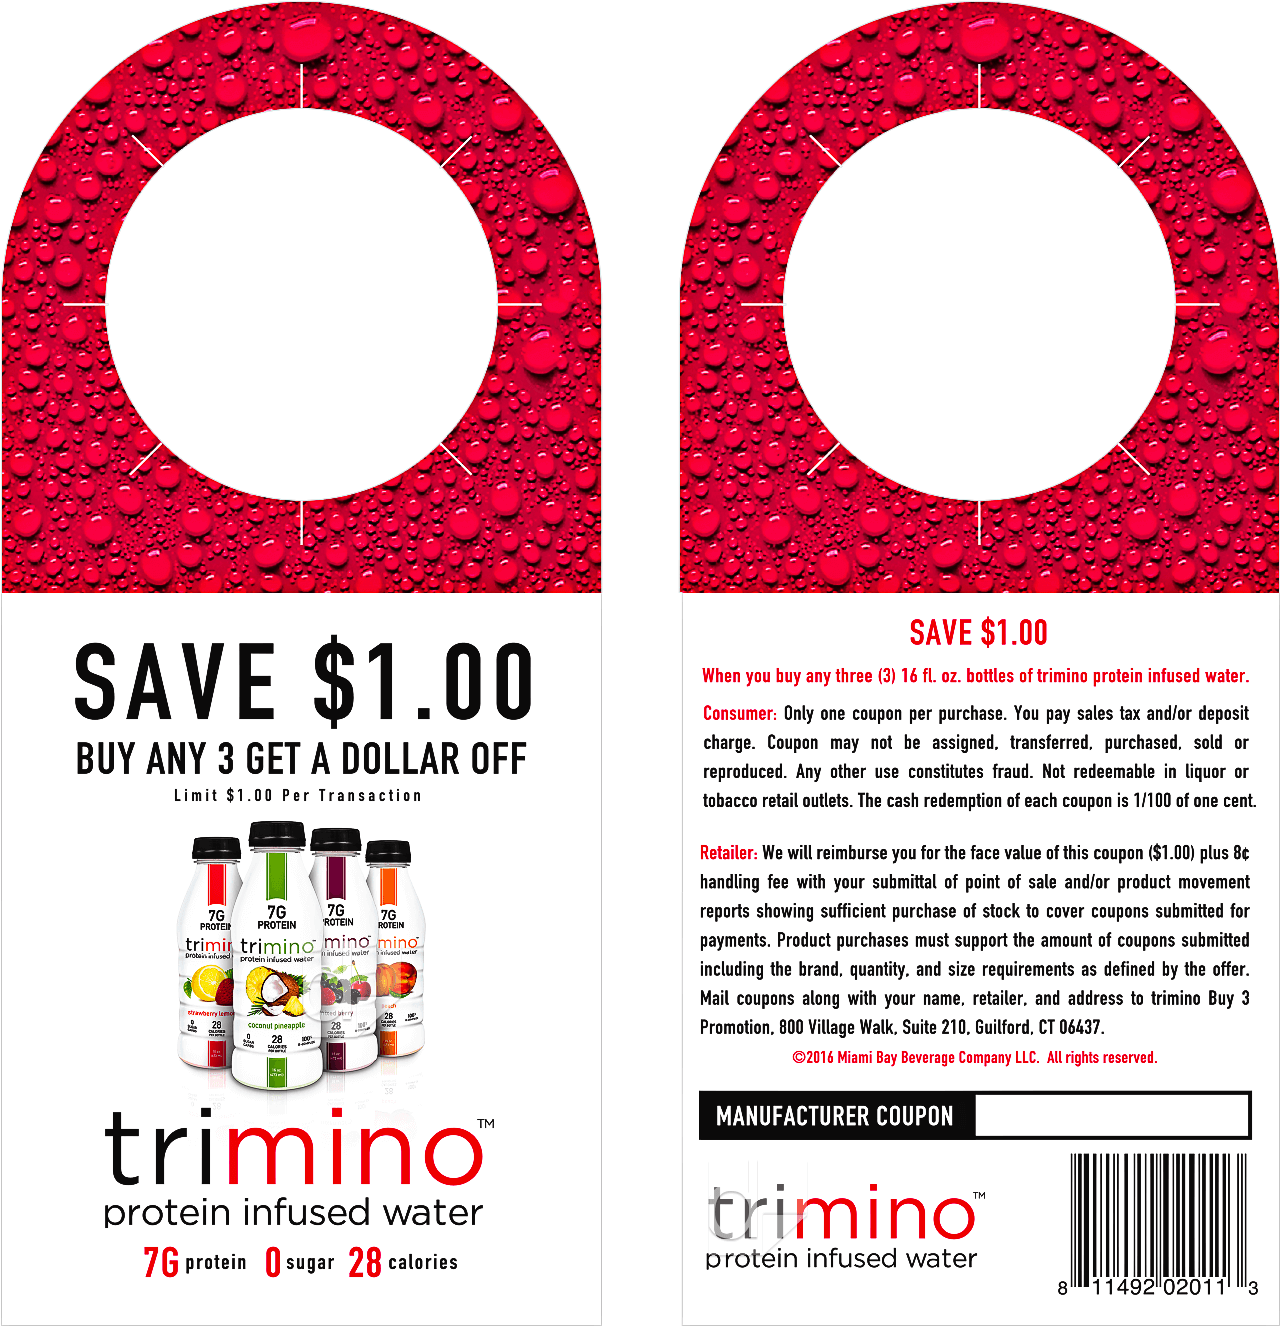 Bottle neck hang tag, double-sided custom die cut and printed by Dilco for Timino